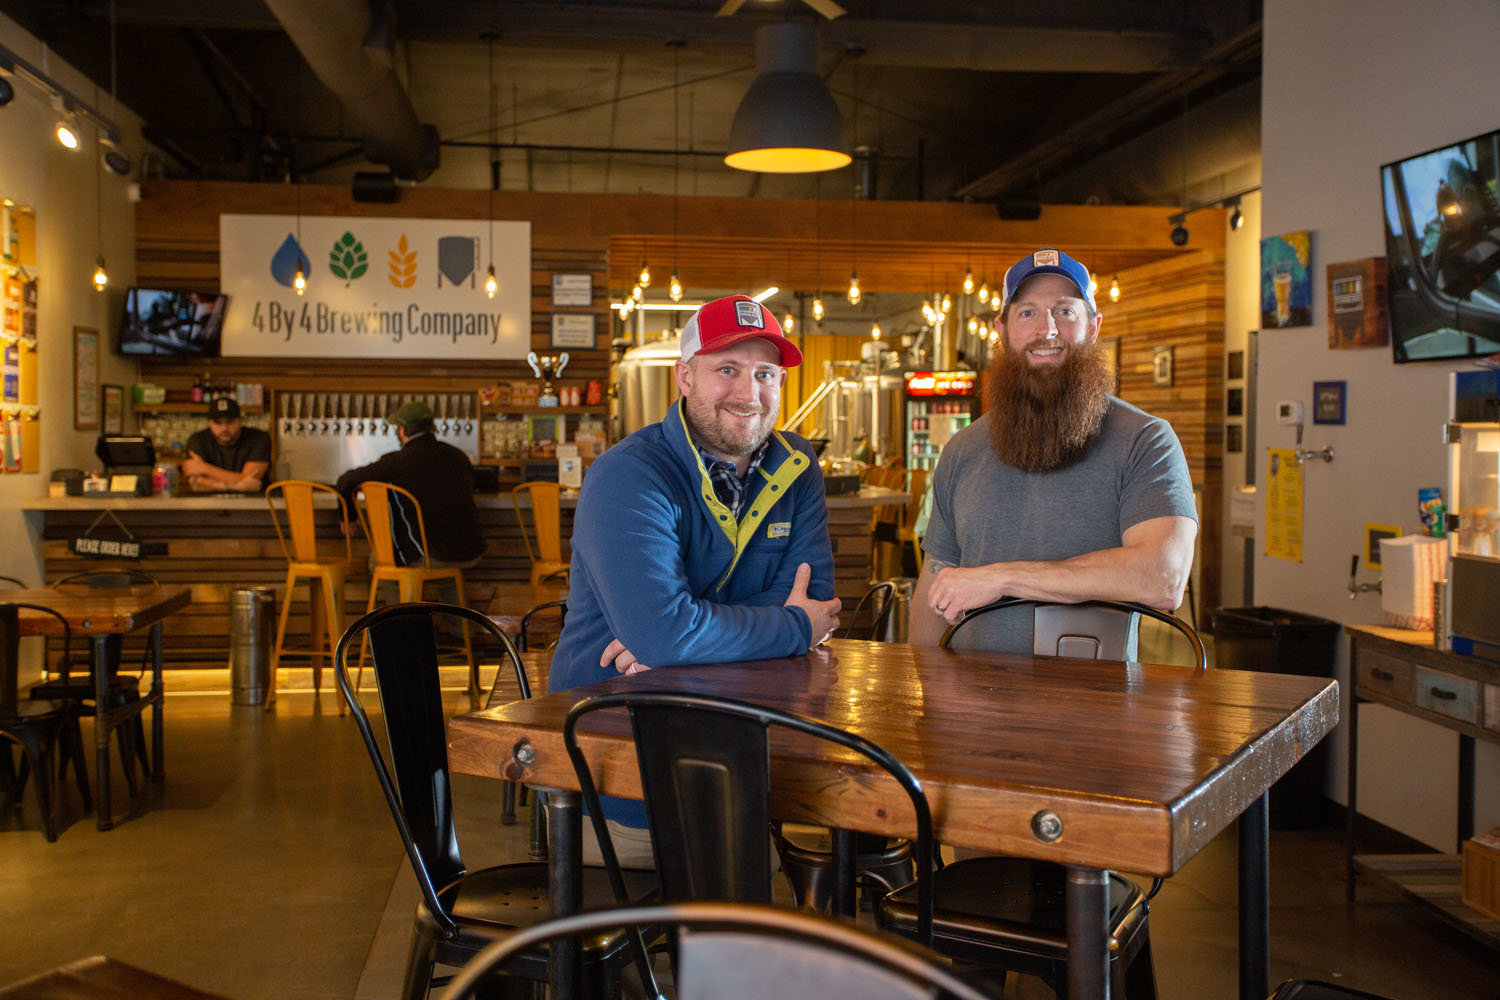 Derek Shimeall, left, who co-owns 4 by 4 Brewing with Chris Shaffer and other partners, says the Galloway Village taproom will remain a priority.